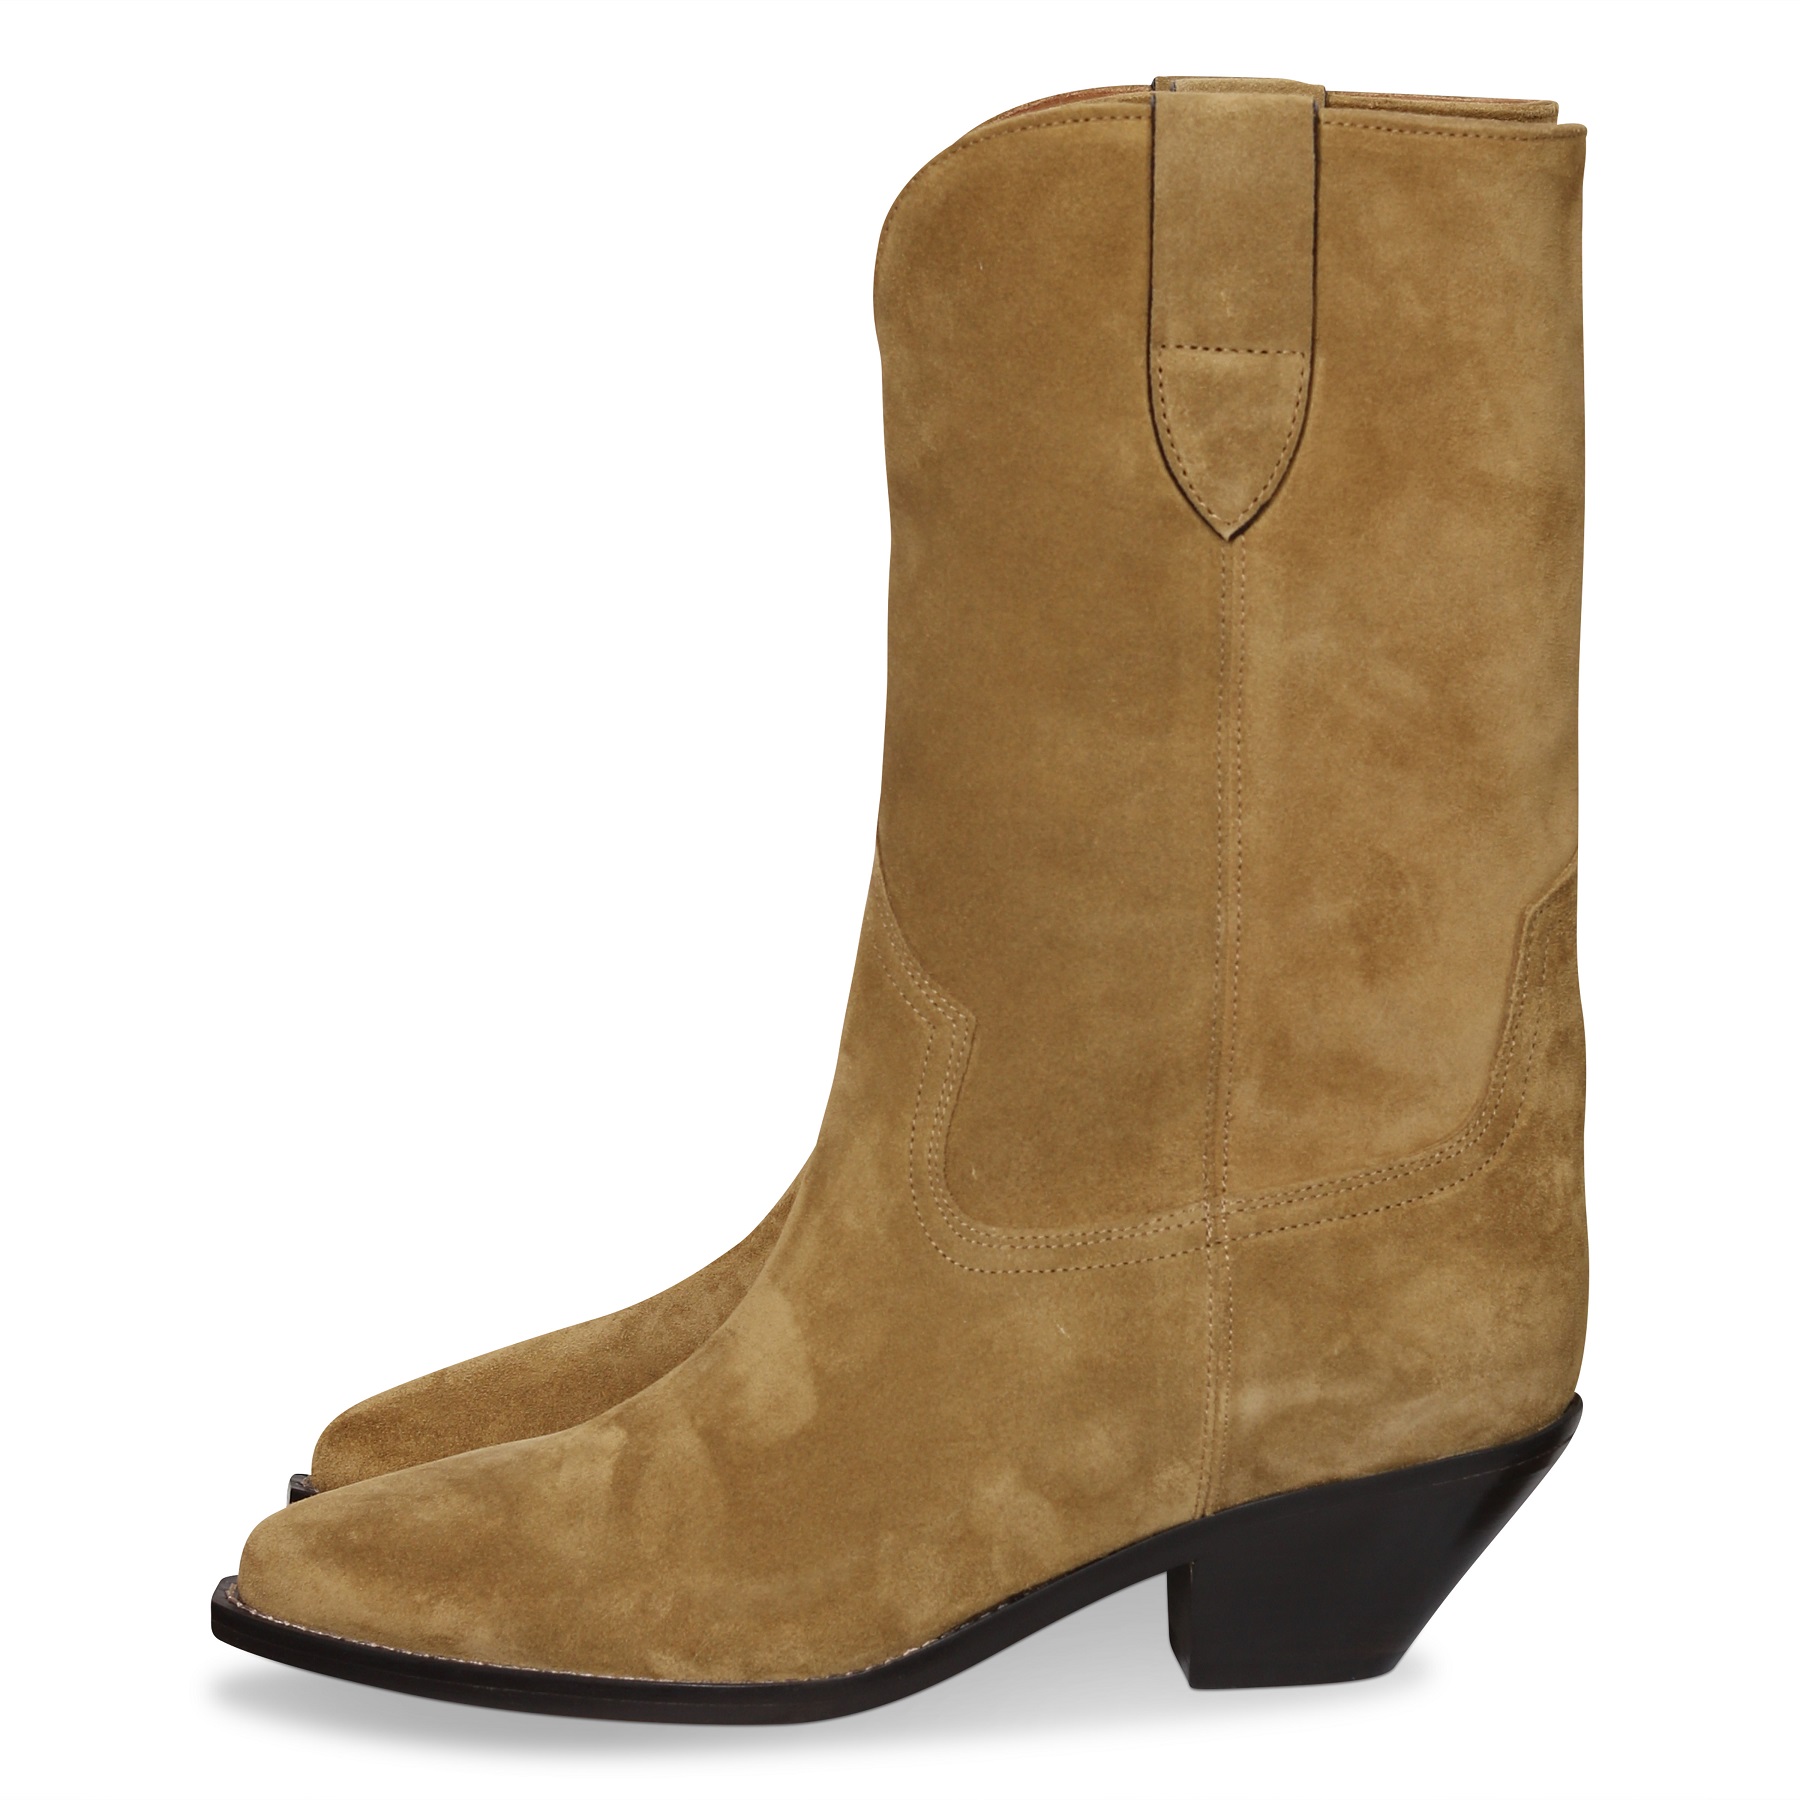 ISABEL MARANT Dahope Boots in Taupe